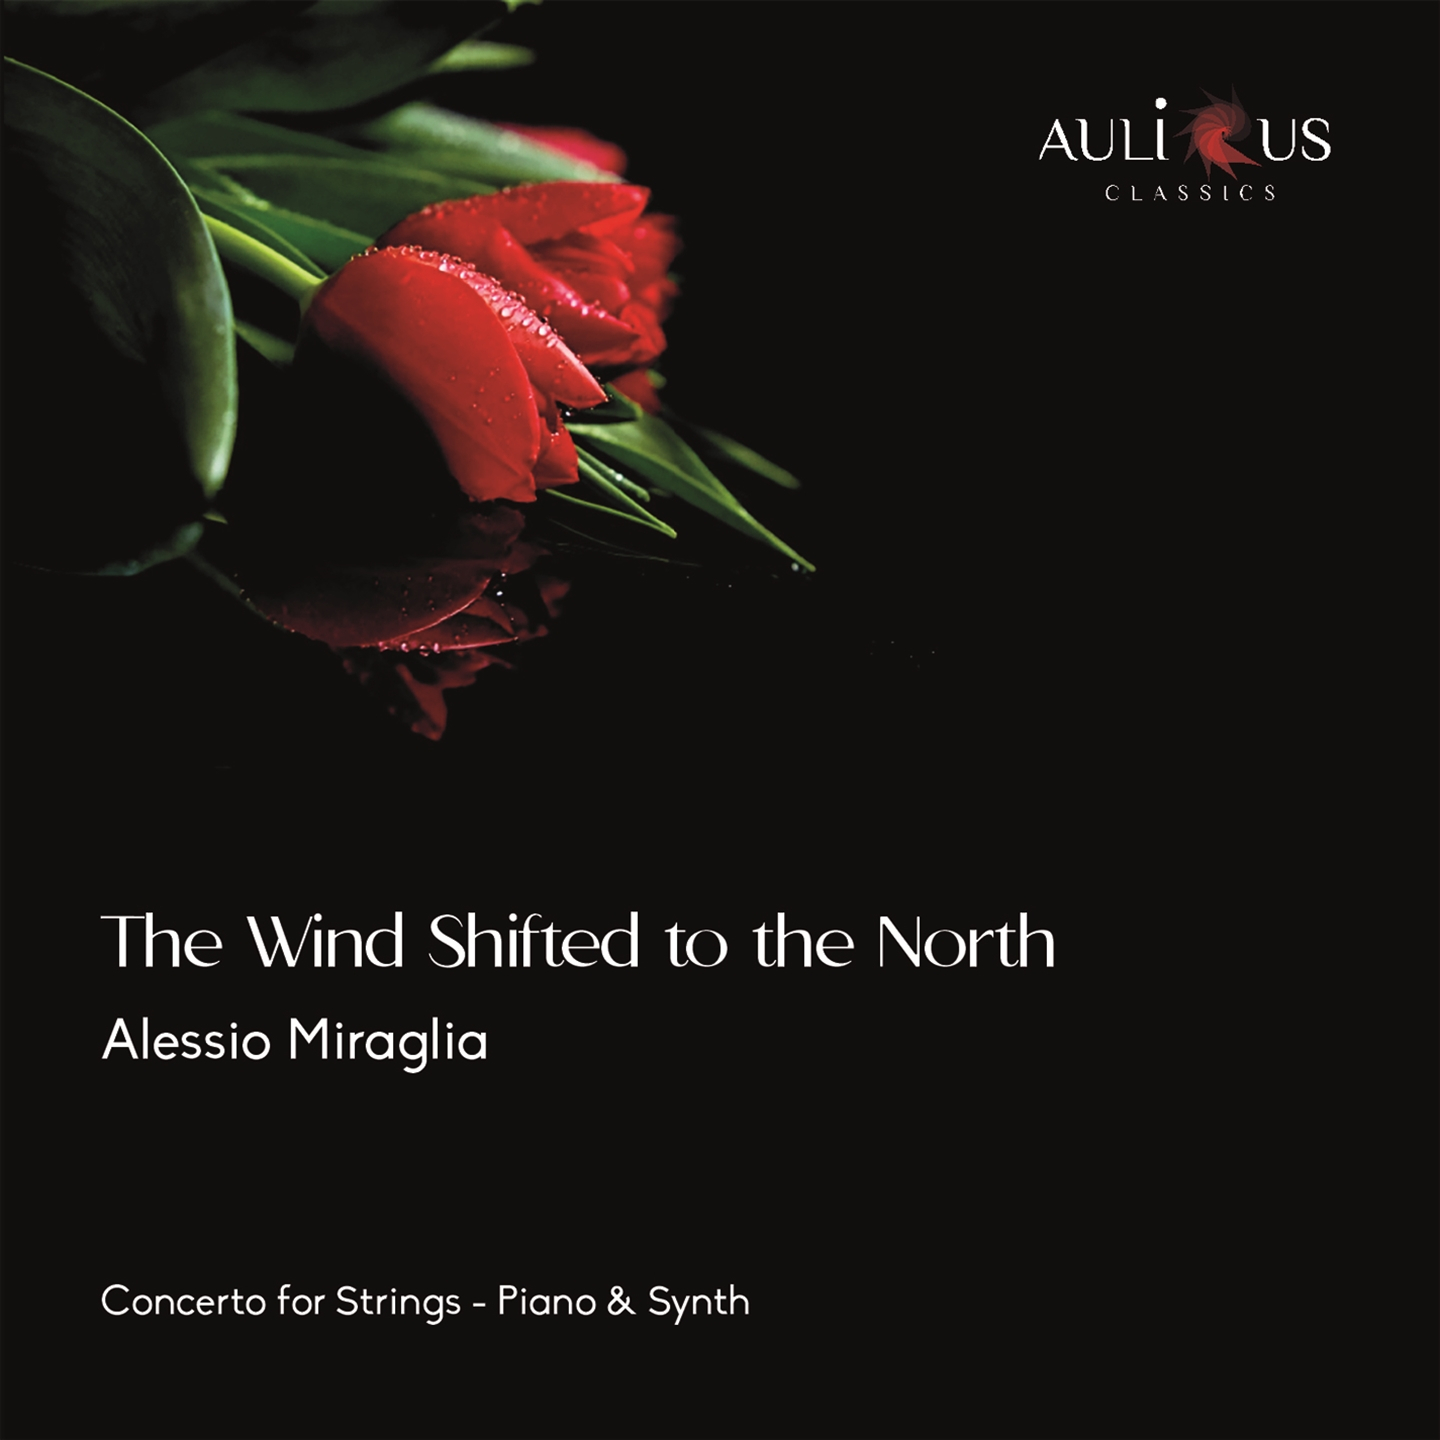 THE WIND SHIFTED TO THE NORTH - CONCERTO FOR STRINGS, PIANO & SYNTH